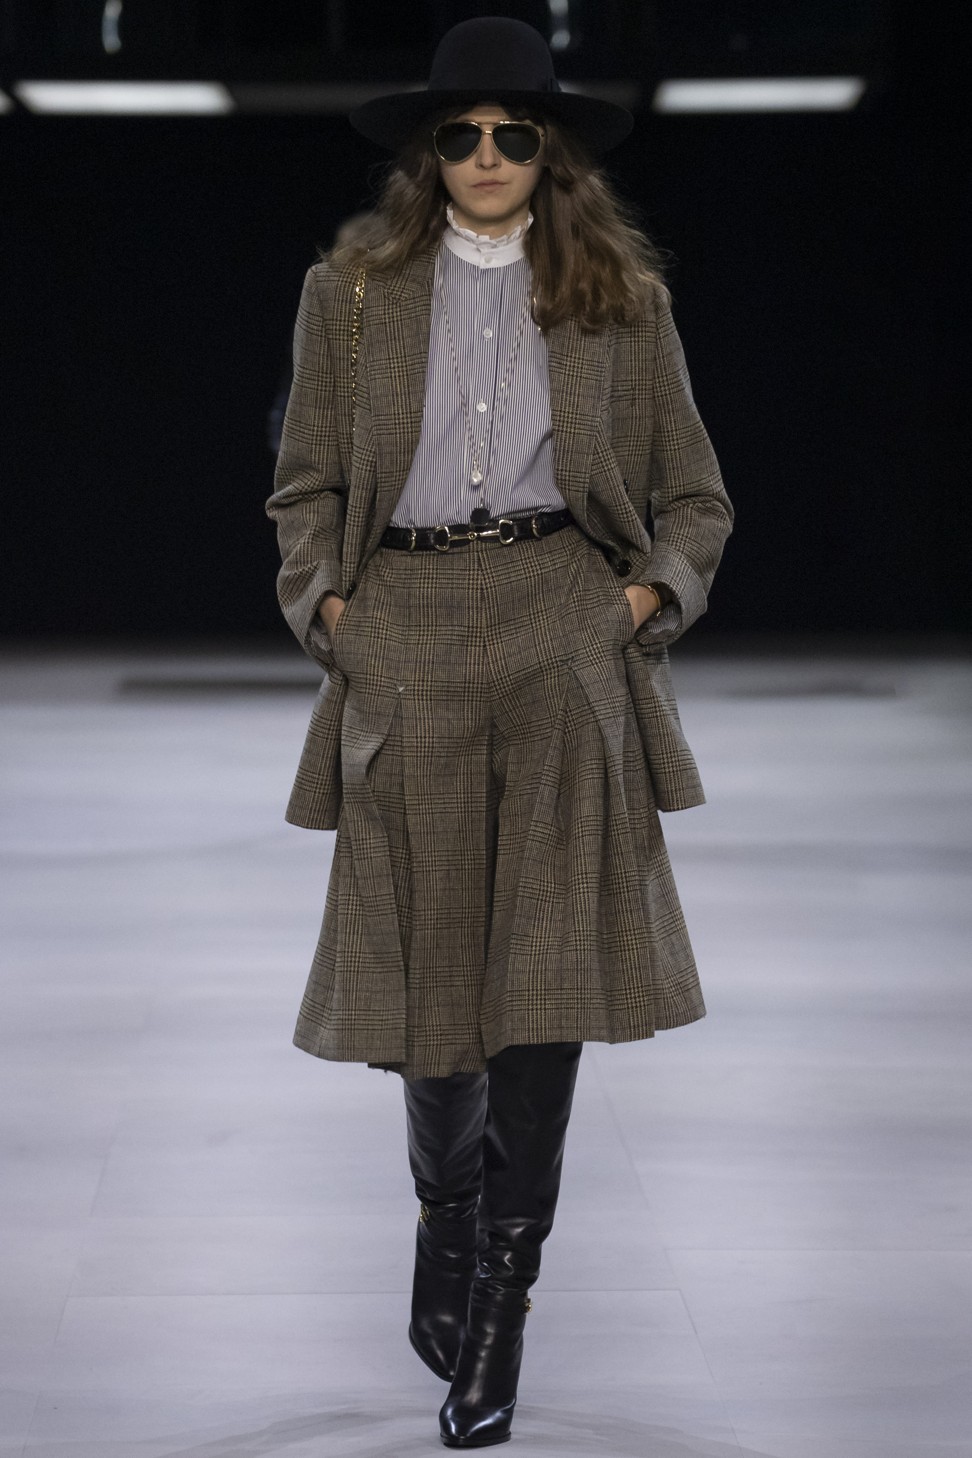 Paris Fashion Week review: highs and lows of the top designers and ...